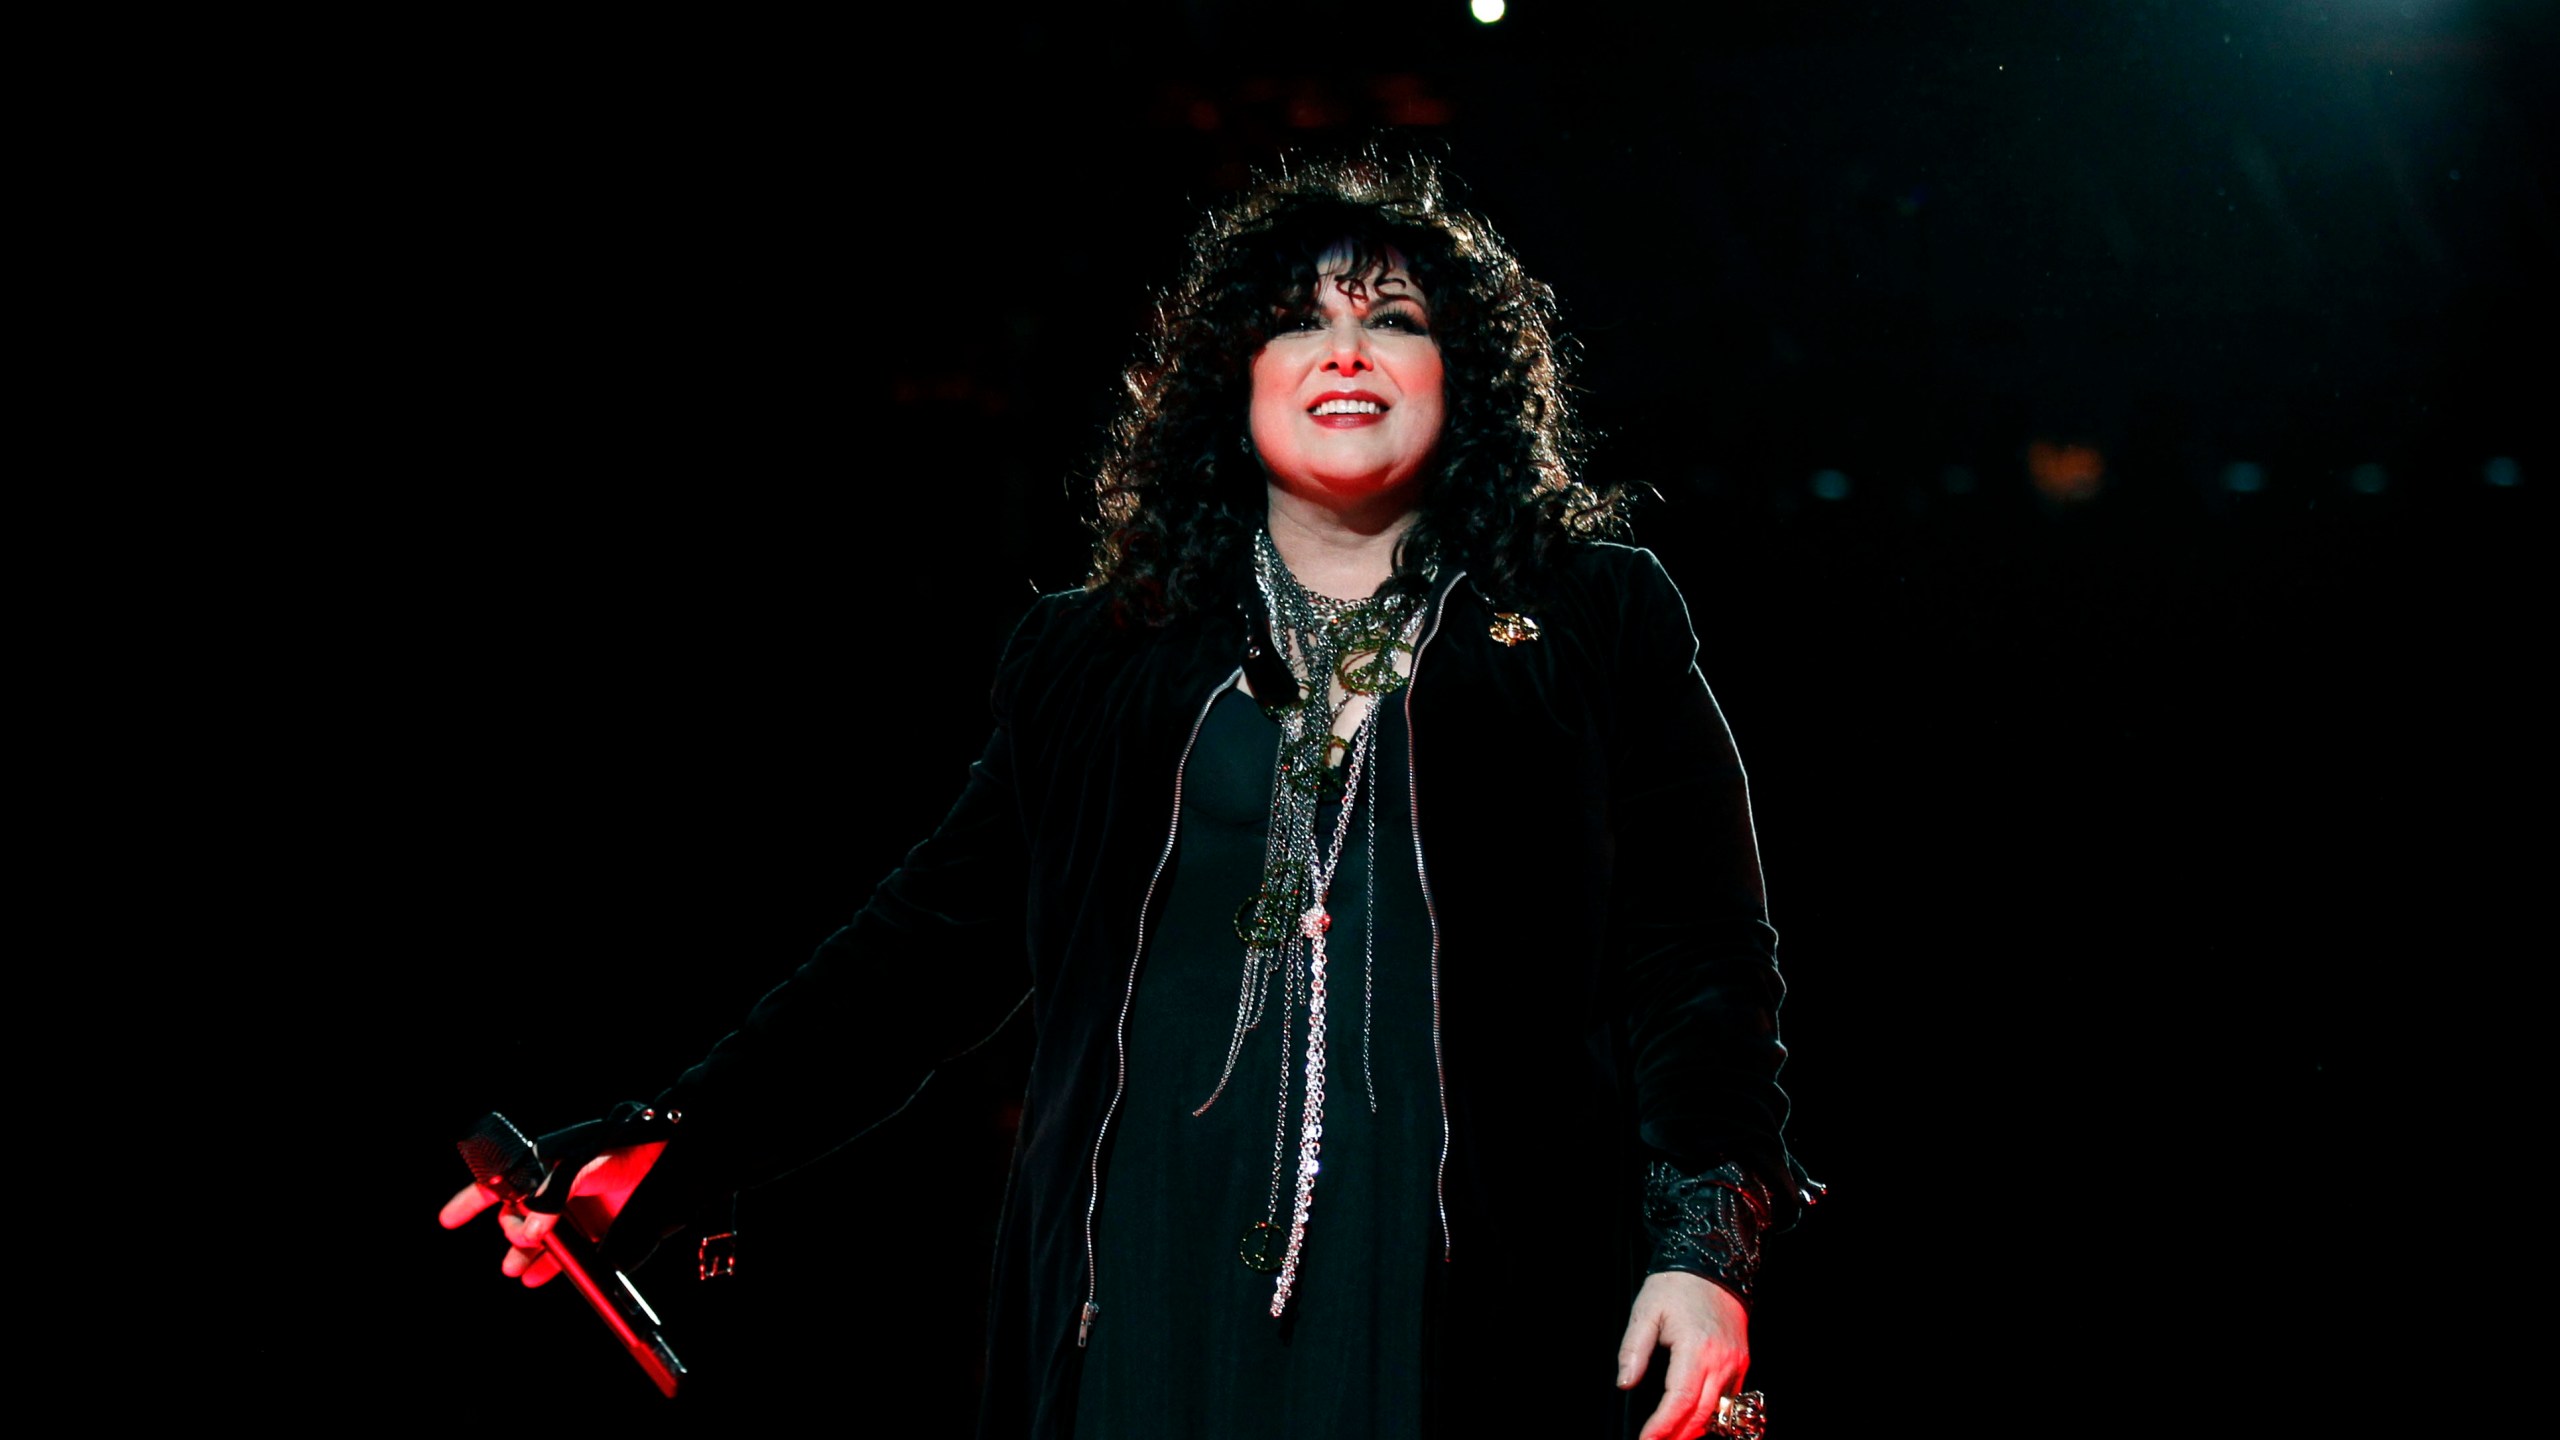 FILE - Ann Wilson, of the band Heart, performs onstage at the "Vh1 Divas Salute the Troops" on Friday, Dec. 3, 2010 in San Diego. Wilson says she has cancer. The band is postponing the remaining shows on its Royal Flush Tour. (AP Photo/Matt Sayles, File)